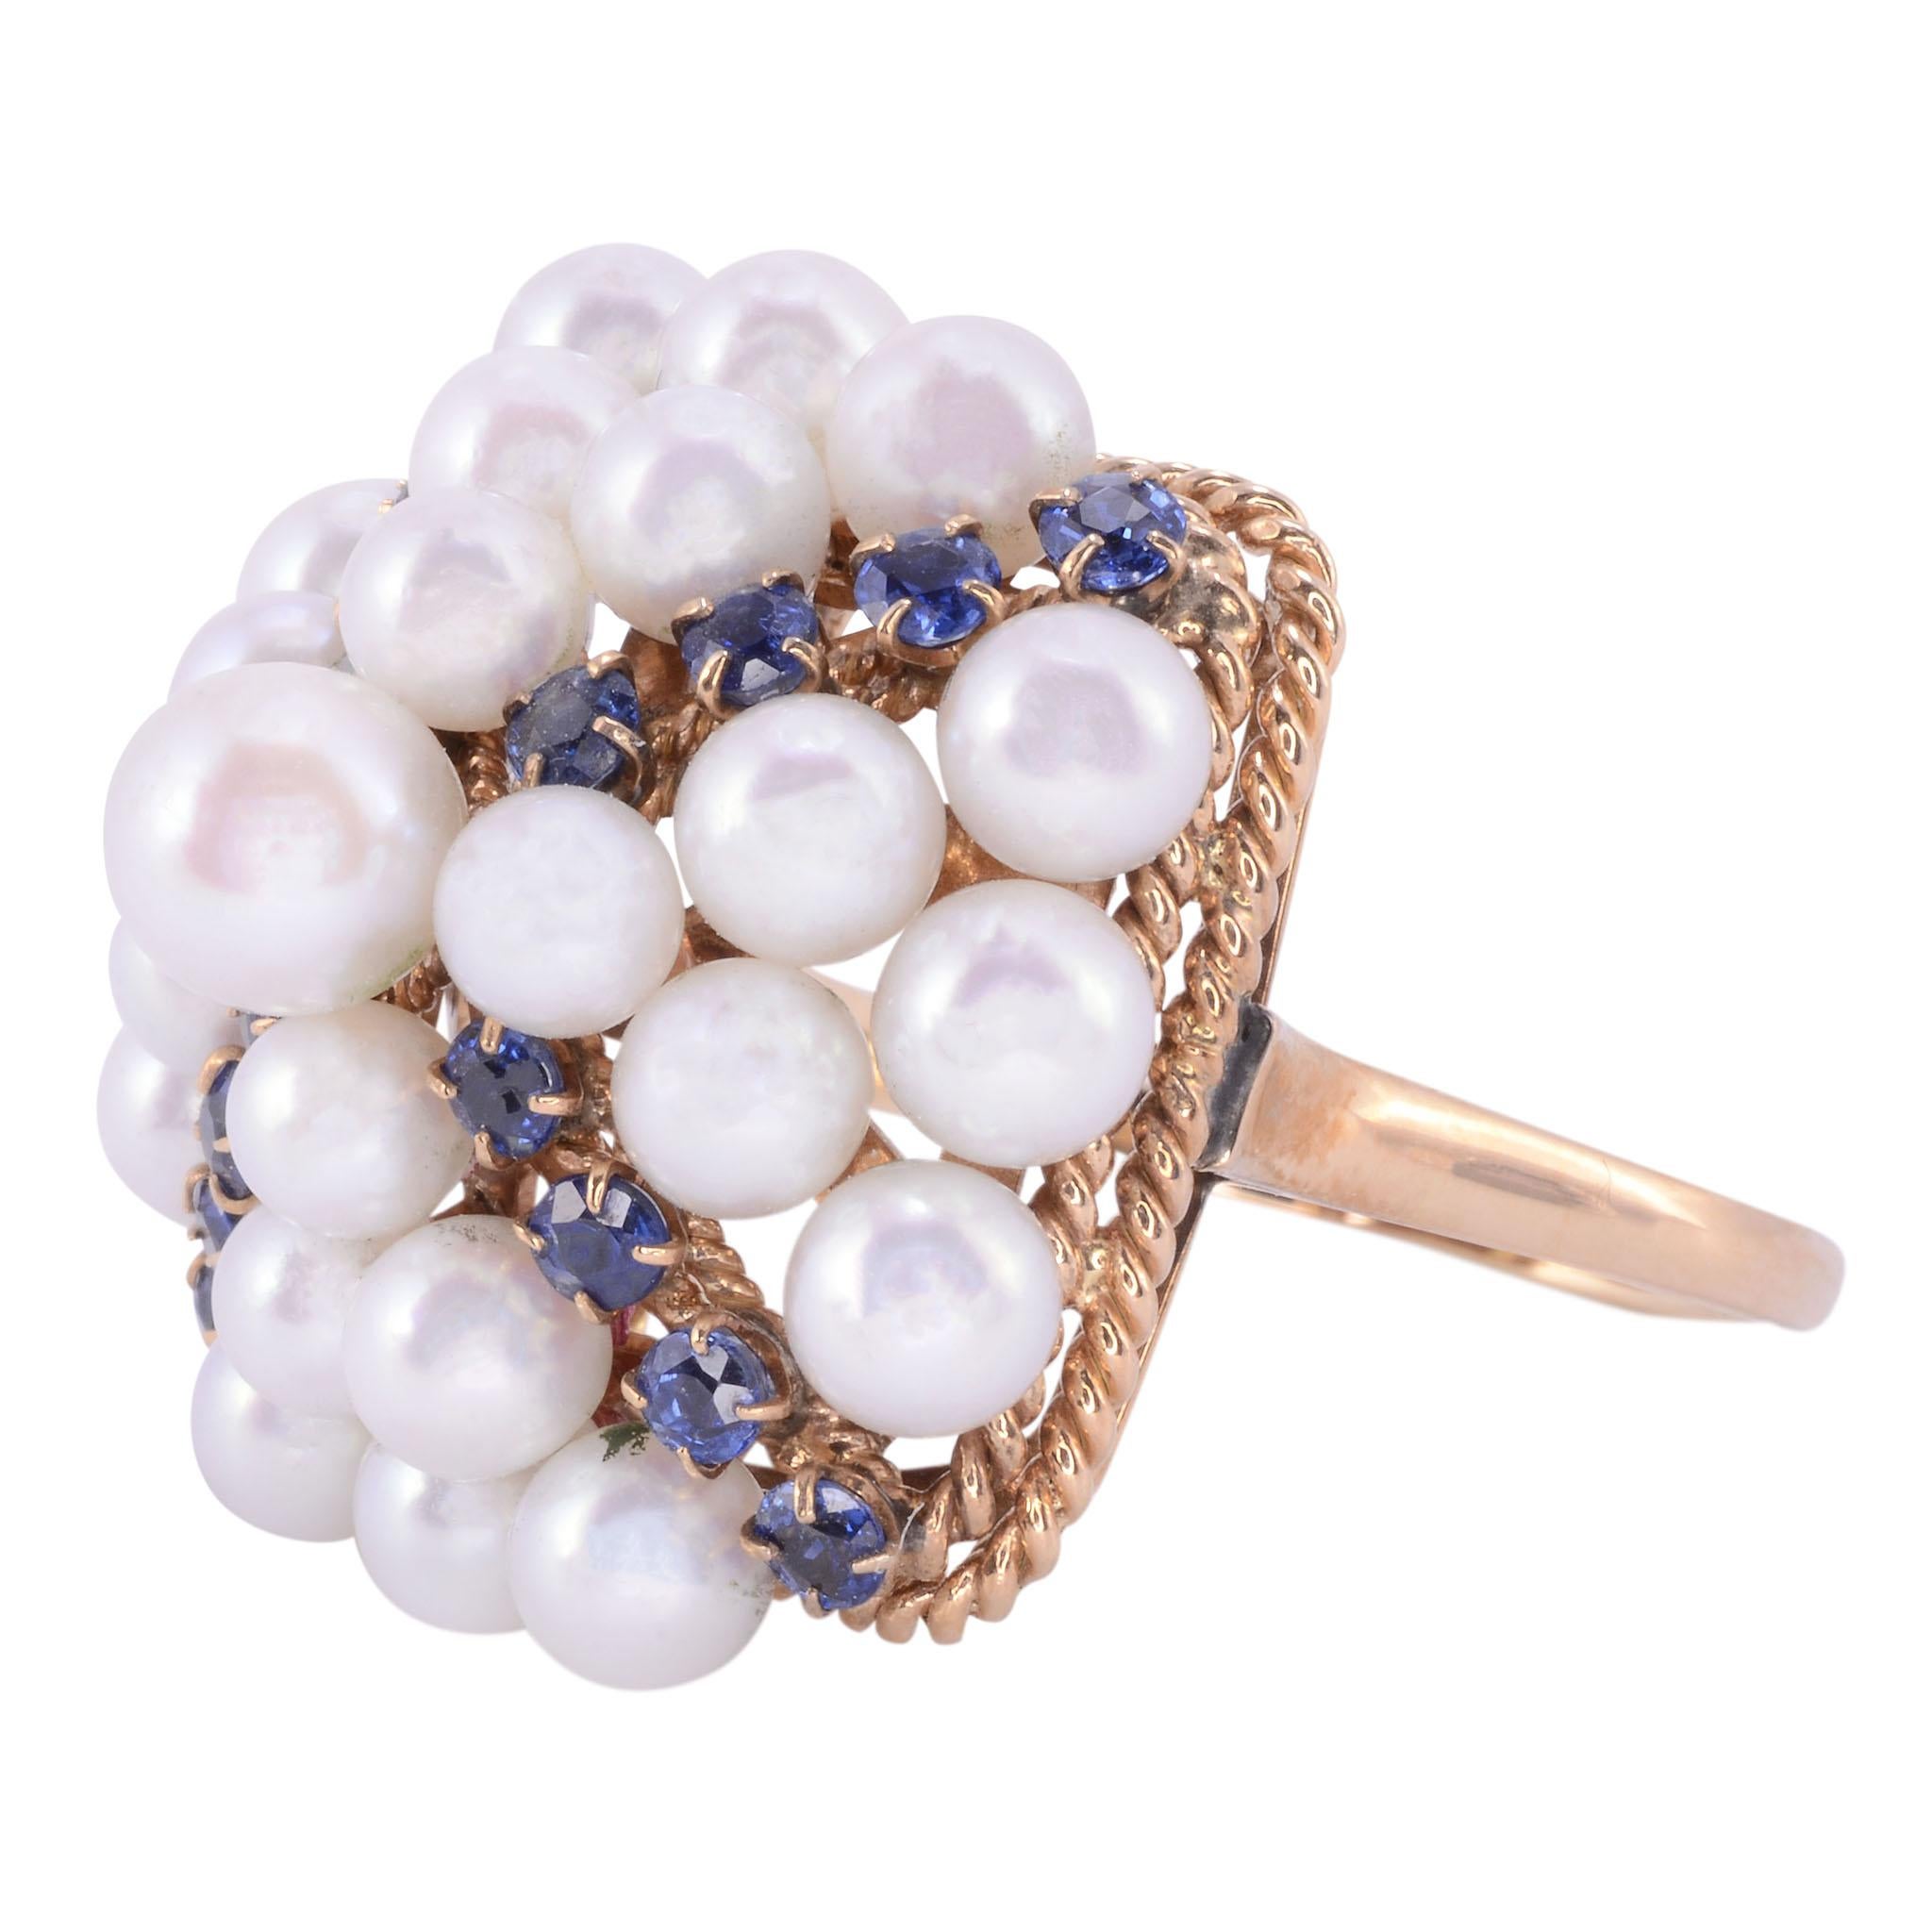 Vintage Akoya pearl & sapphire ring, circa 1955. This 14 karat yellow gold ring features a cluster of 25 Akoya cultured pearls and 16 sapphires in four rows at .96 carat total weight and is size 9.25. This vintage pearl and sapphire ring is